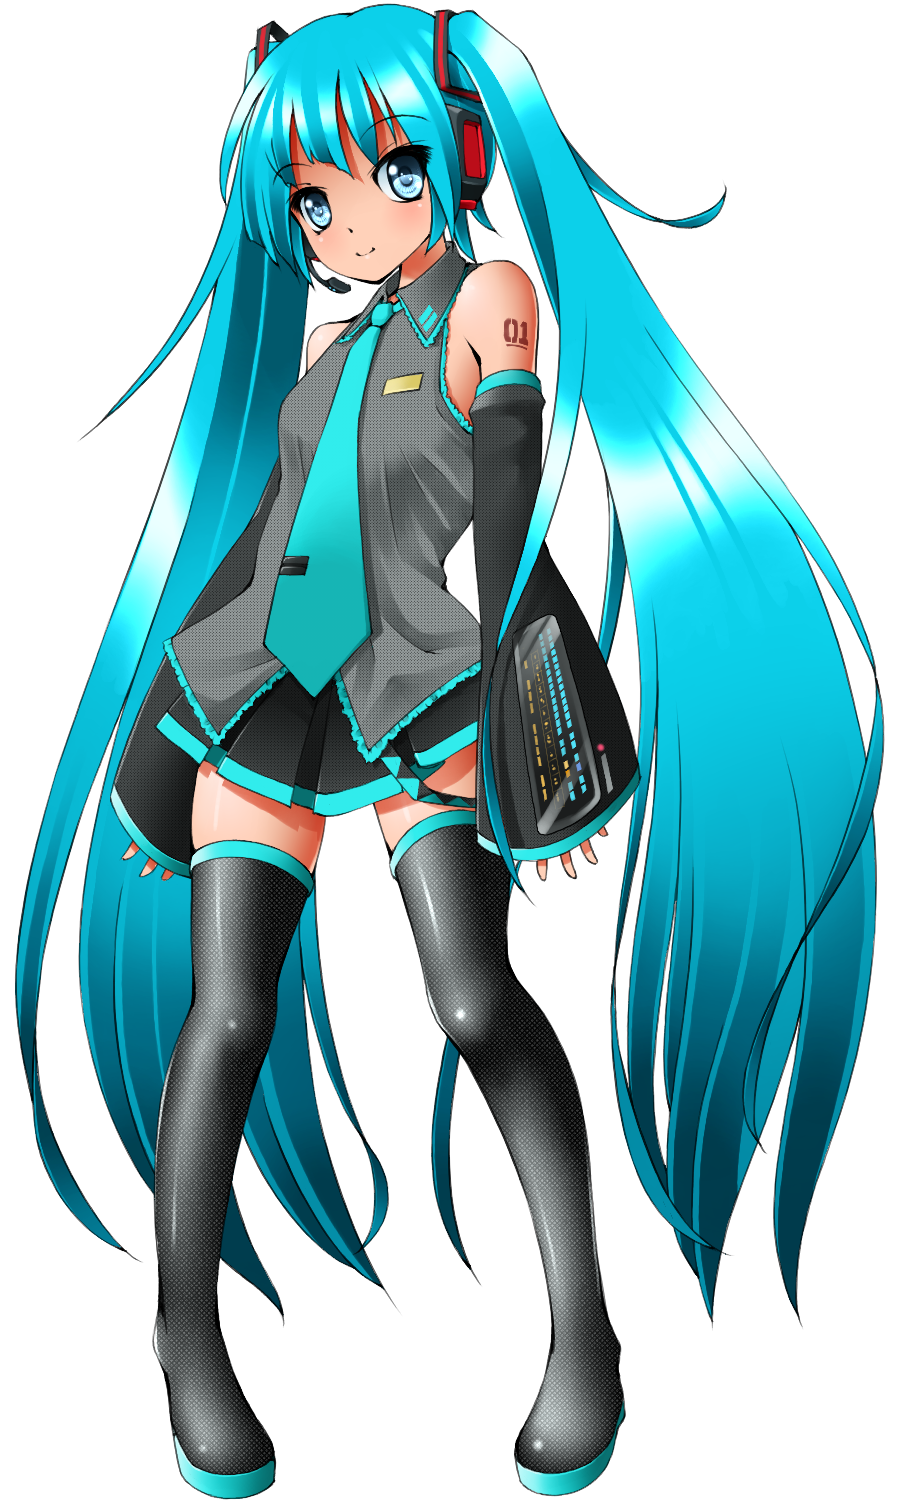 1girl aqua_eyes aqua_hair bangs black_legwear boots breasts detached_sleeves dr_rex eyebrows_visible_through_hair full_body hatsune_miku headset highres long_hair looking_at_viewer necktie small_breasts solo standing tattoo thigh-highs thigh_boots twintails very_long_hair vocaloid vocaloid_boxart_pose white_background